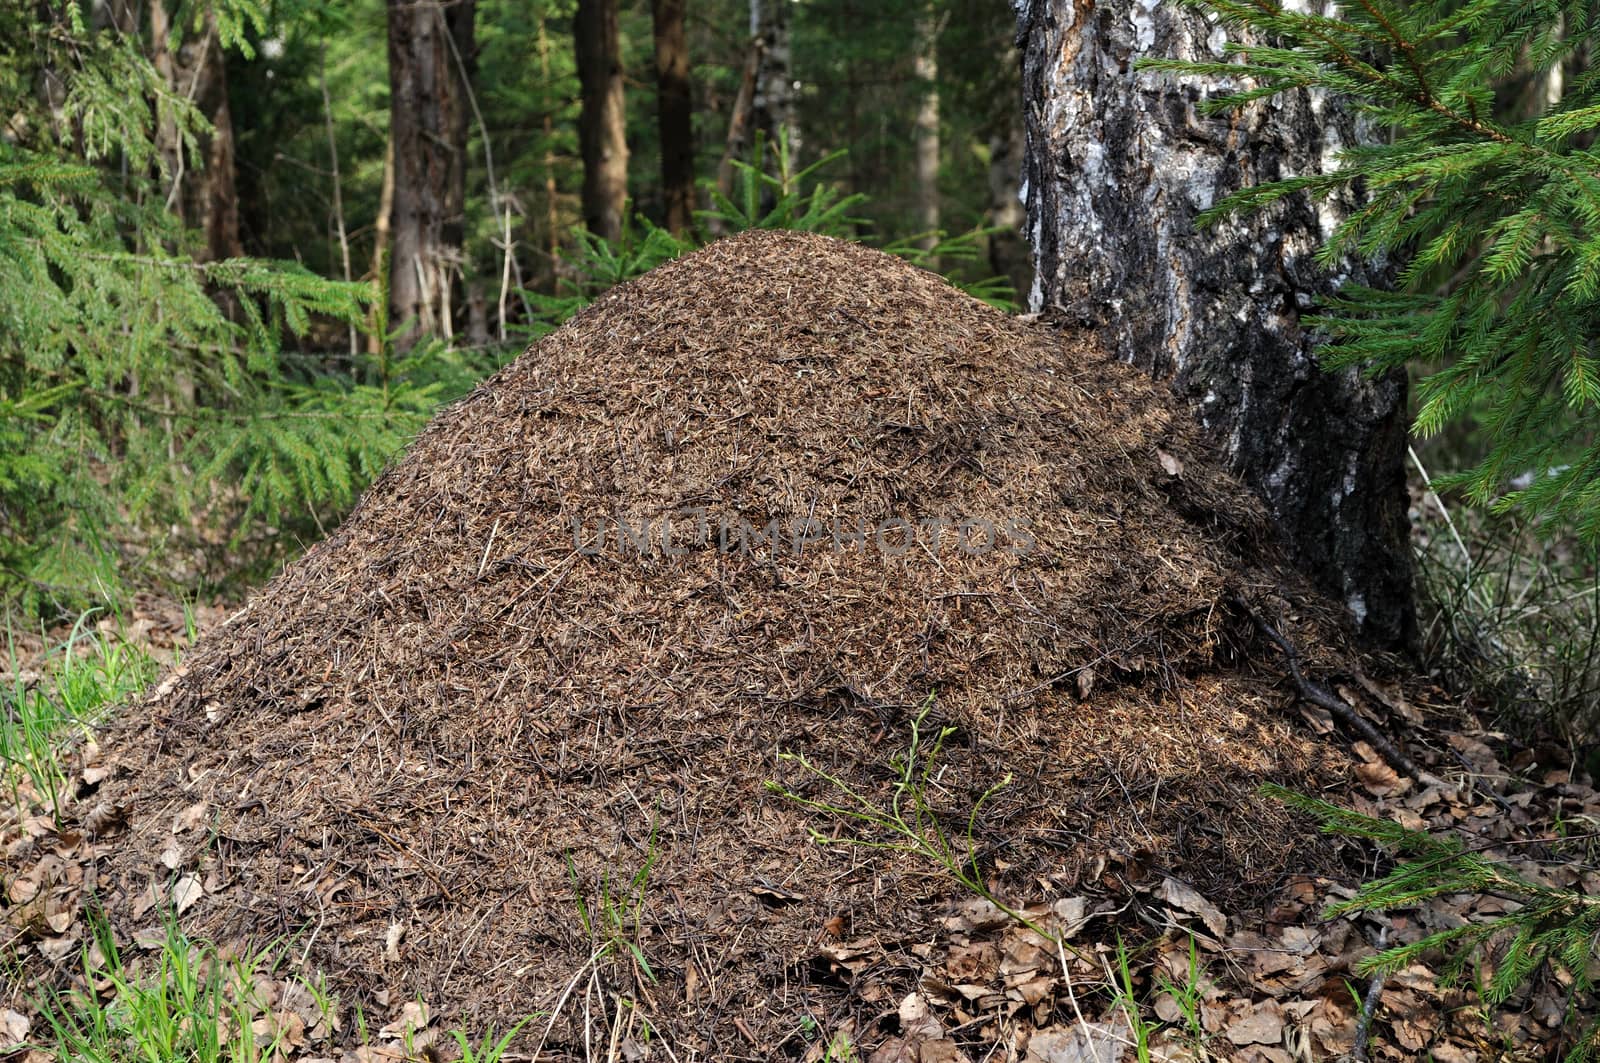 Ant hill near birch trunk in spring forest